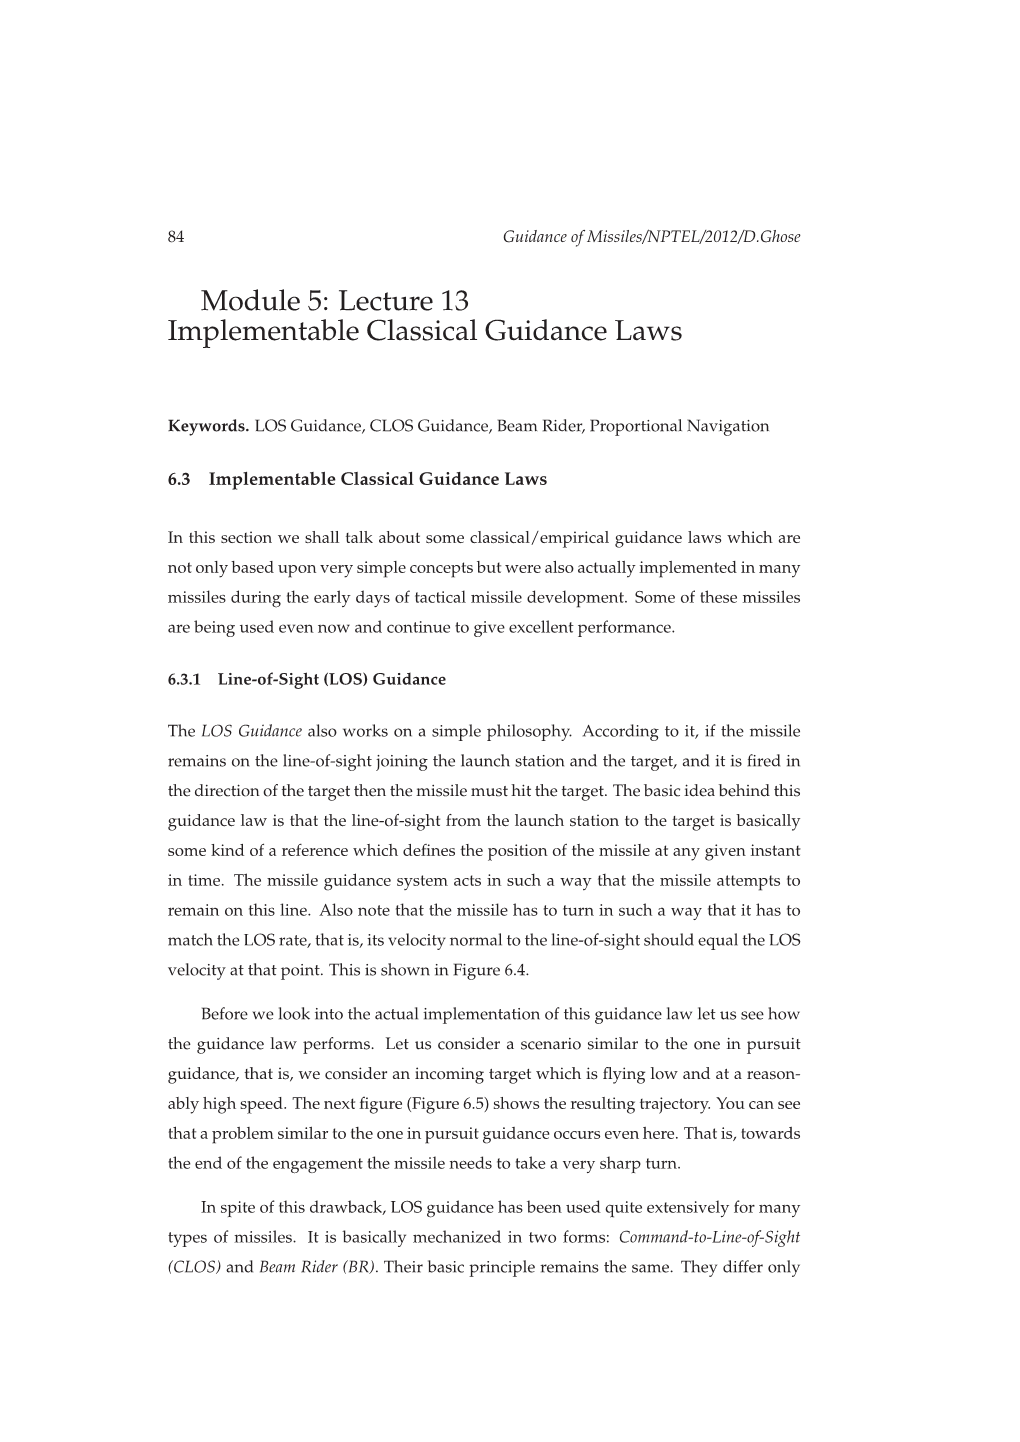 Module 5: Lecture 13 Implementable Classical Guidance Laws